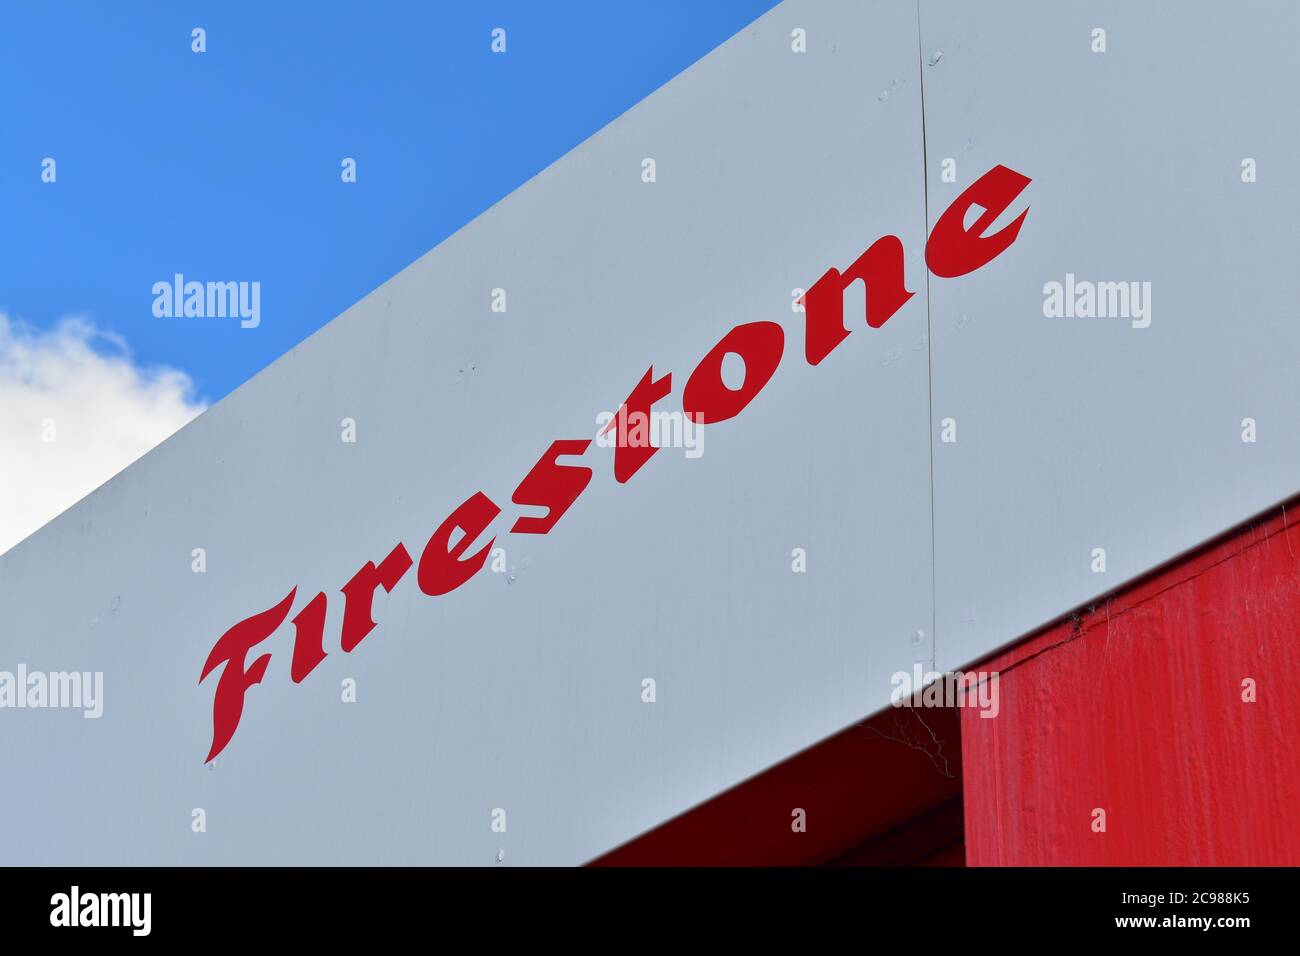 AUCKLAND, NEW ZEALAND - Nov 07, 2020: Auckland / New Zealand - July 11 2020: View of Firestone tires service in Howick industrial zone Stock Photo